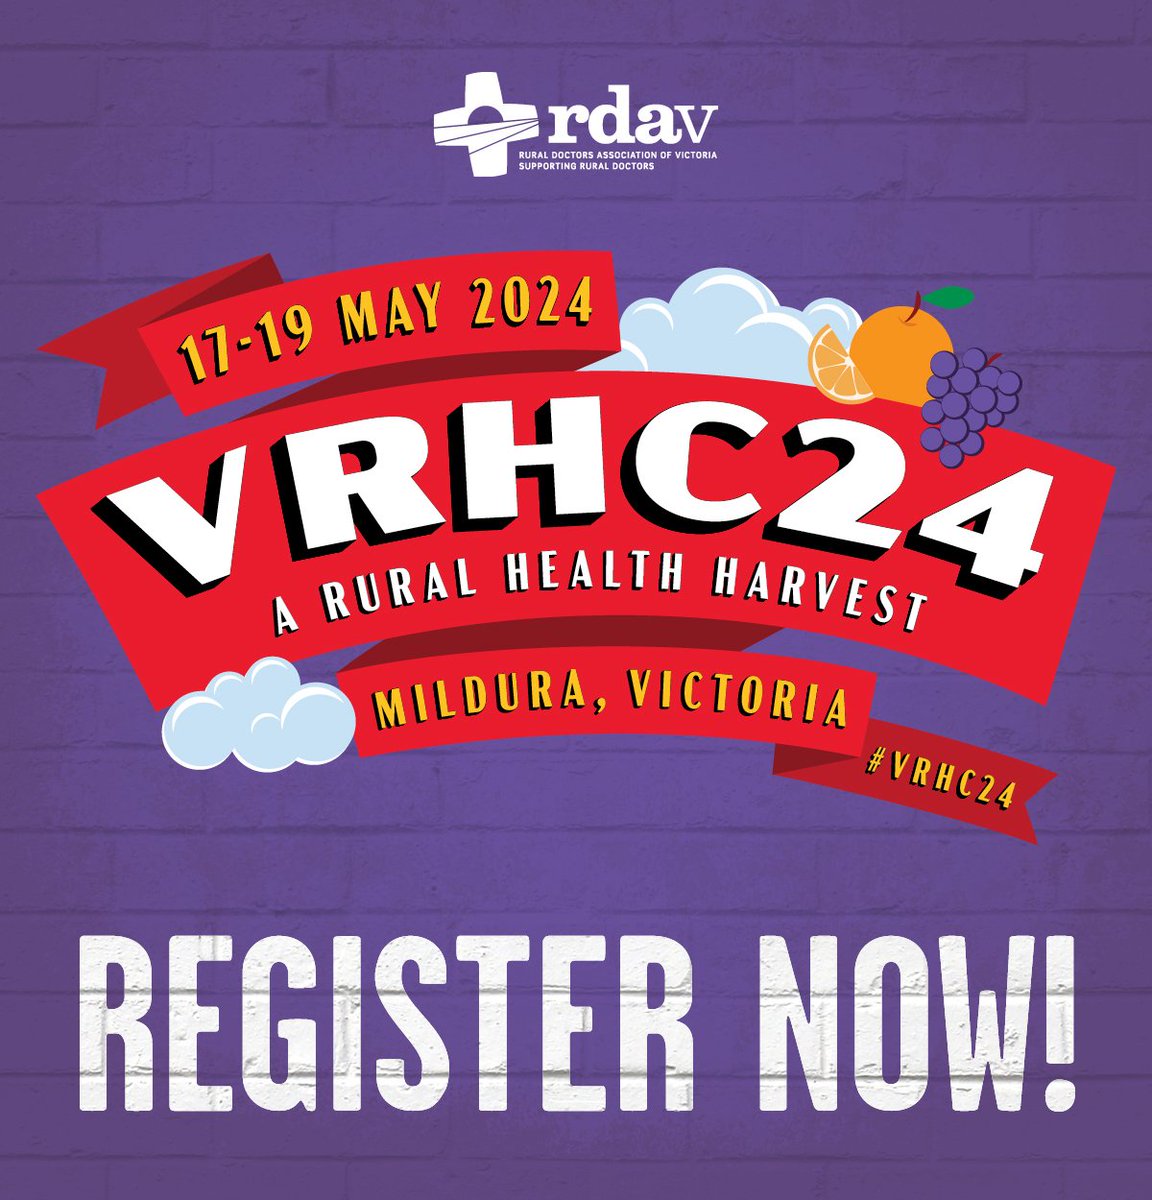 Join us in Mildura for the Victorian Rural Health Conference - Register Now bit.ly/476kxt4 Thanks to our Conference Partners: @ACRRM Gold Partner & Mildura Base Public Hospital: Welcome to Mildura co-host and @MelbConventions & @MilduraCouncil for their support